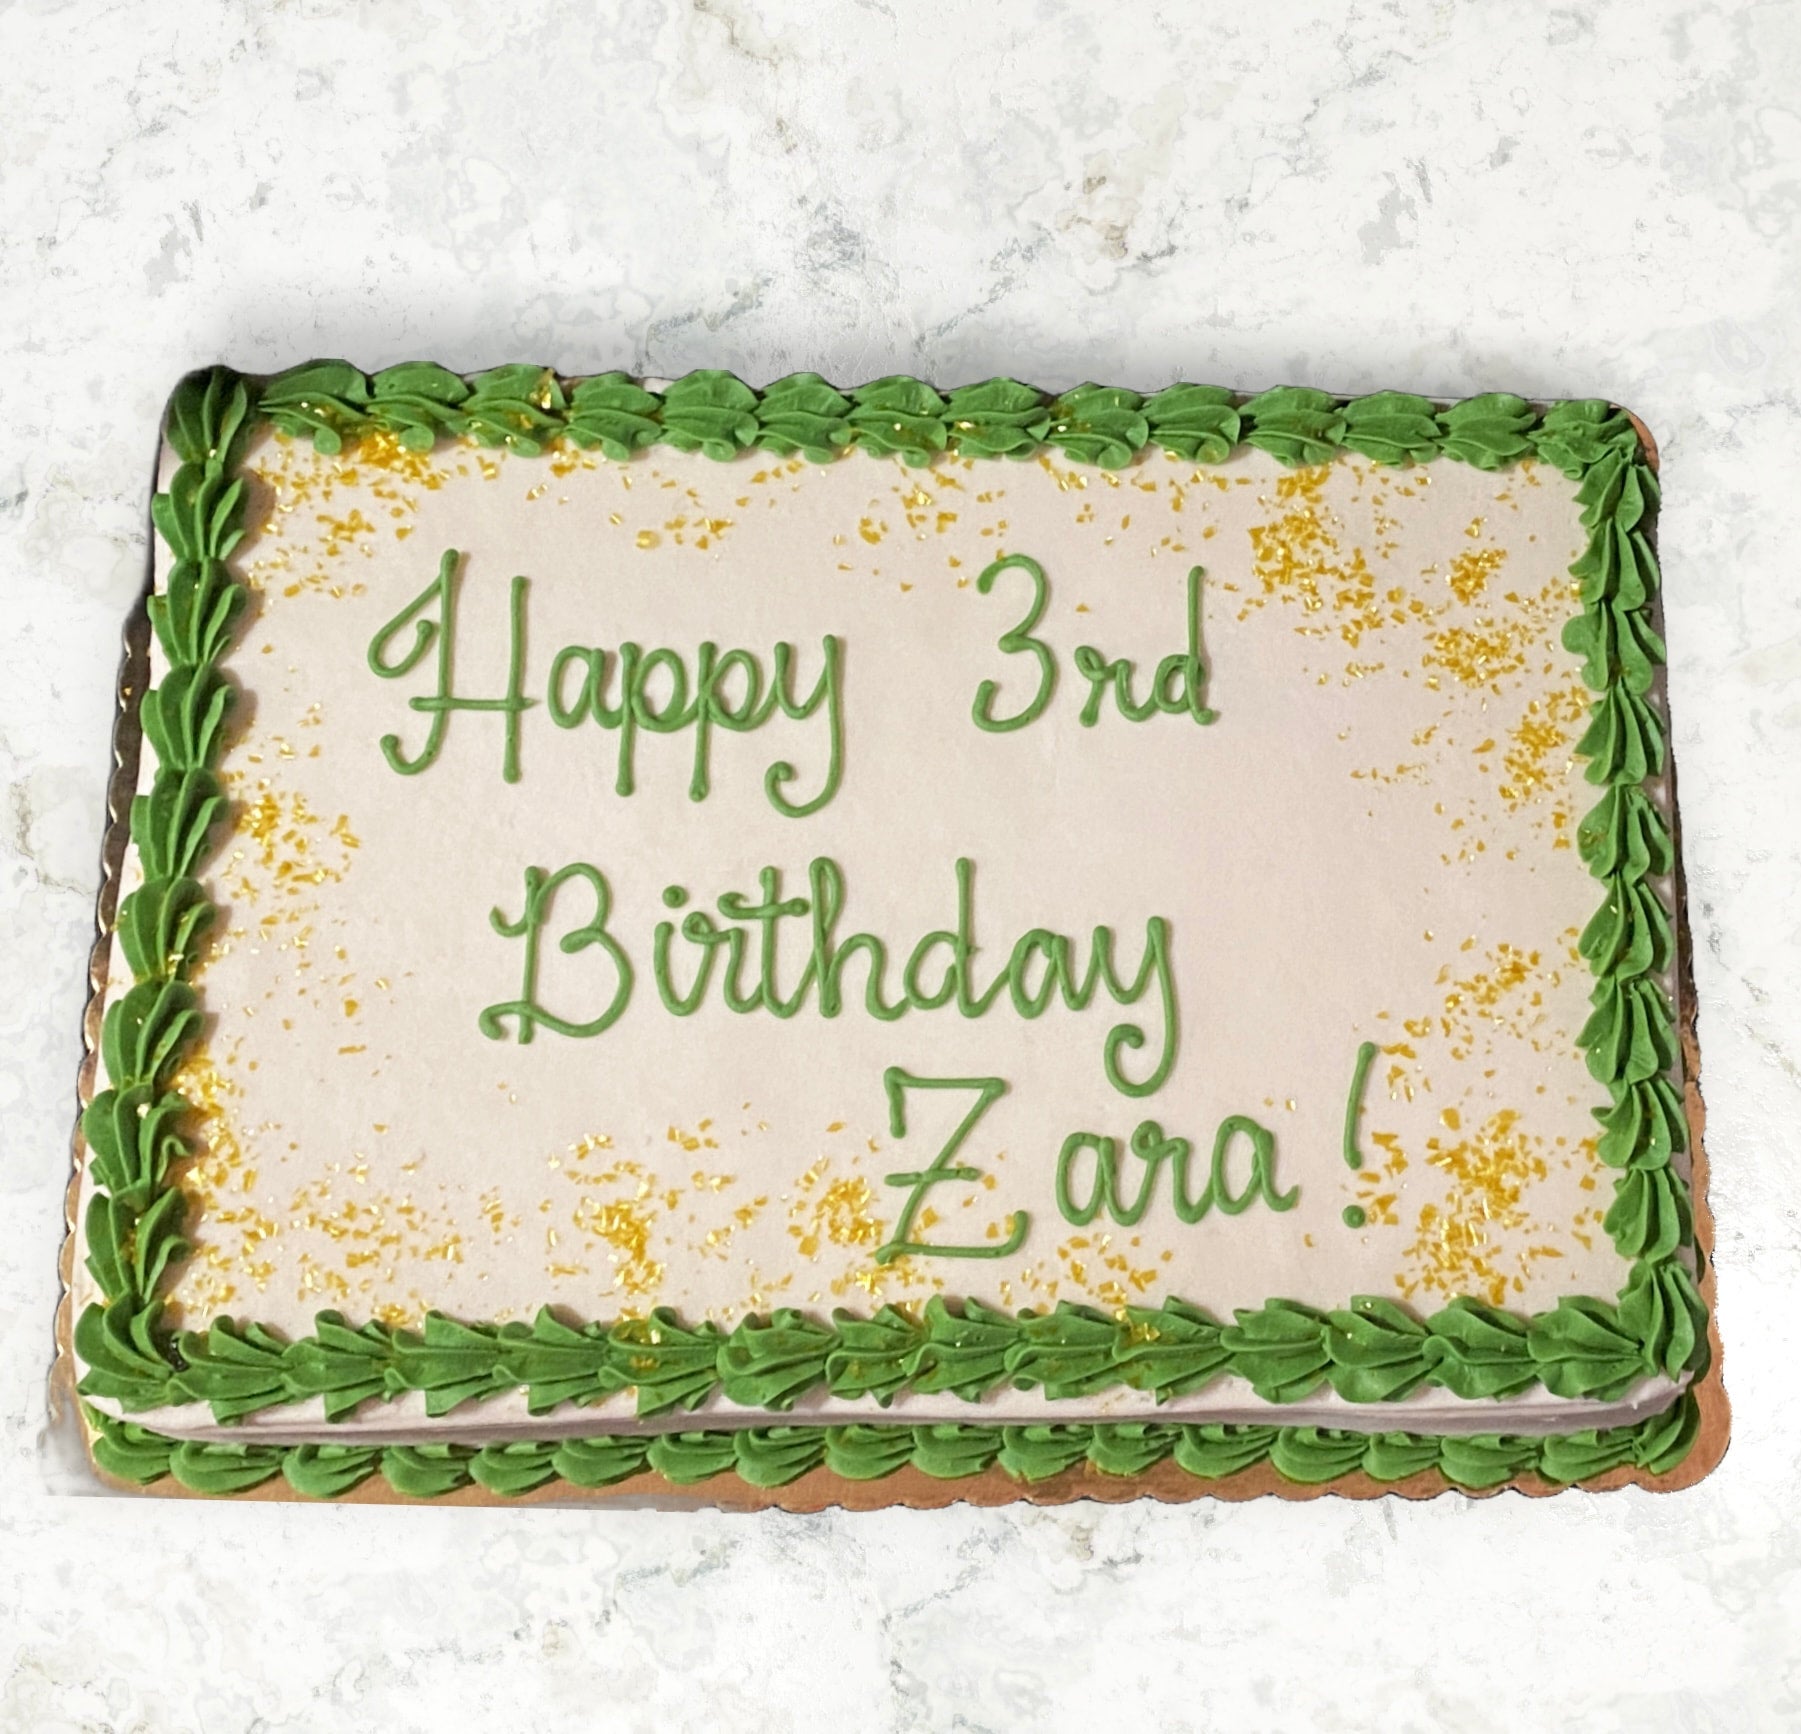 Wishing Zara a very happy birthday! We hope you love your … | Flickr